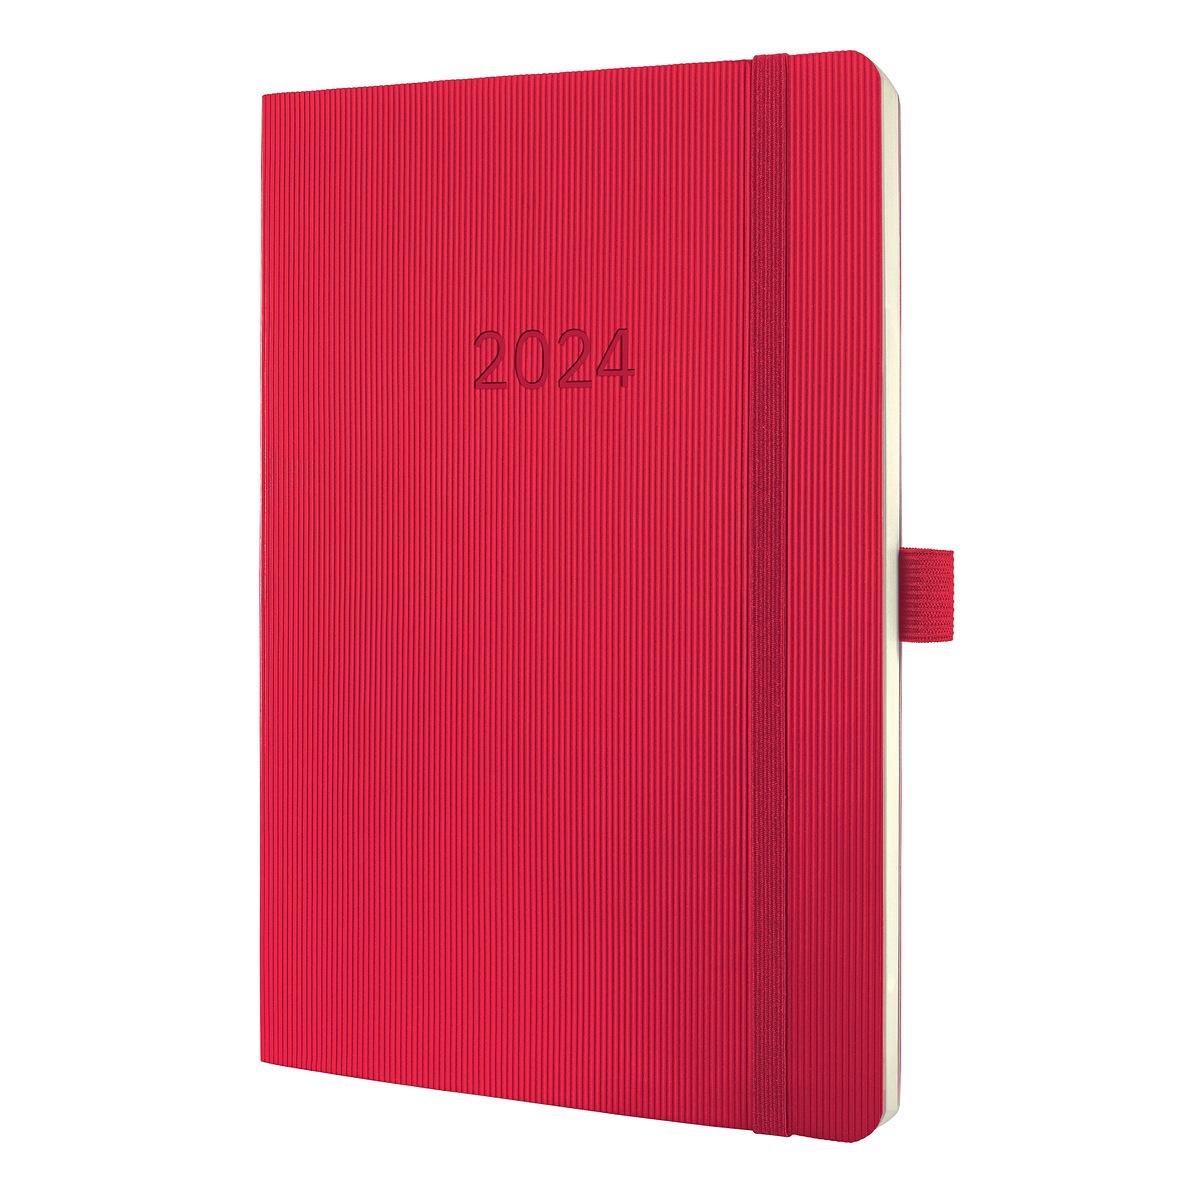 Sigel agenda 2024 - Conceptum - A5 - softcover - 2 pagina's / 1 week - rood - SI-C2434